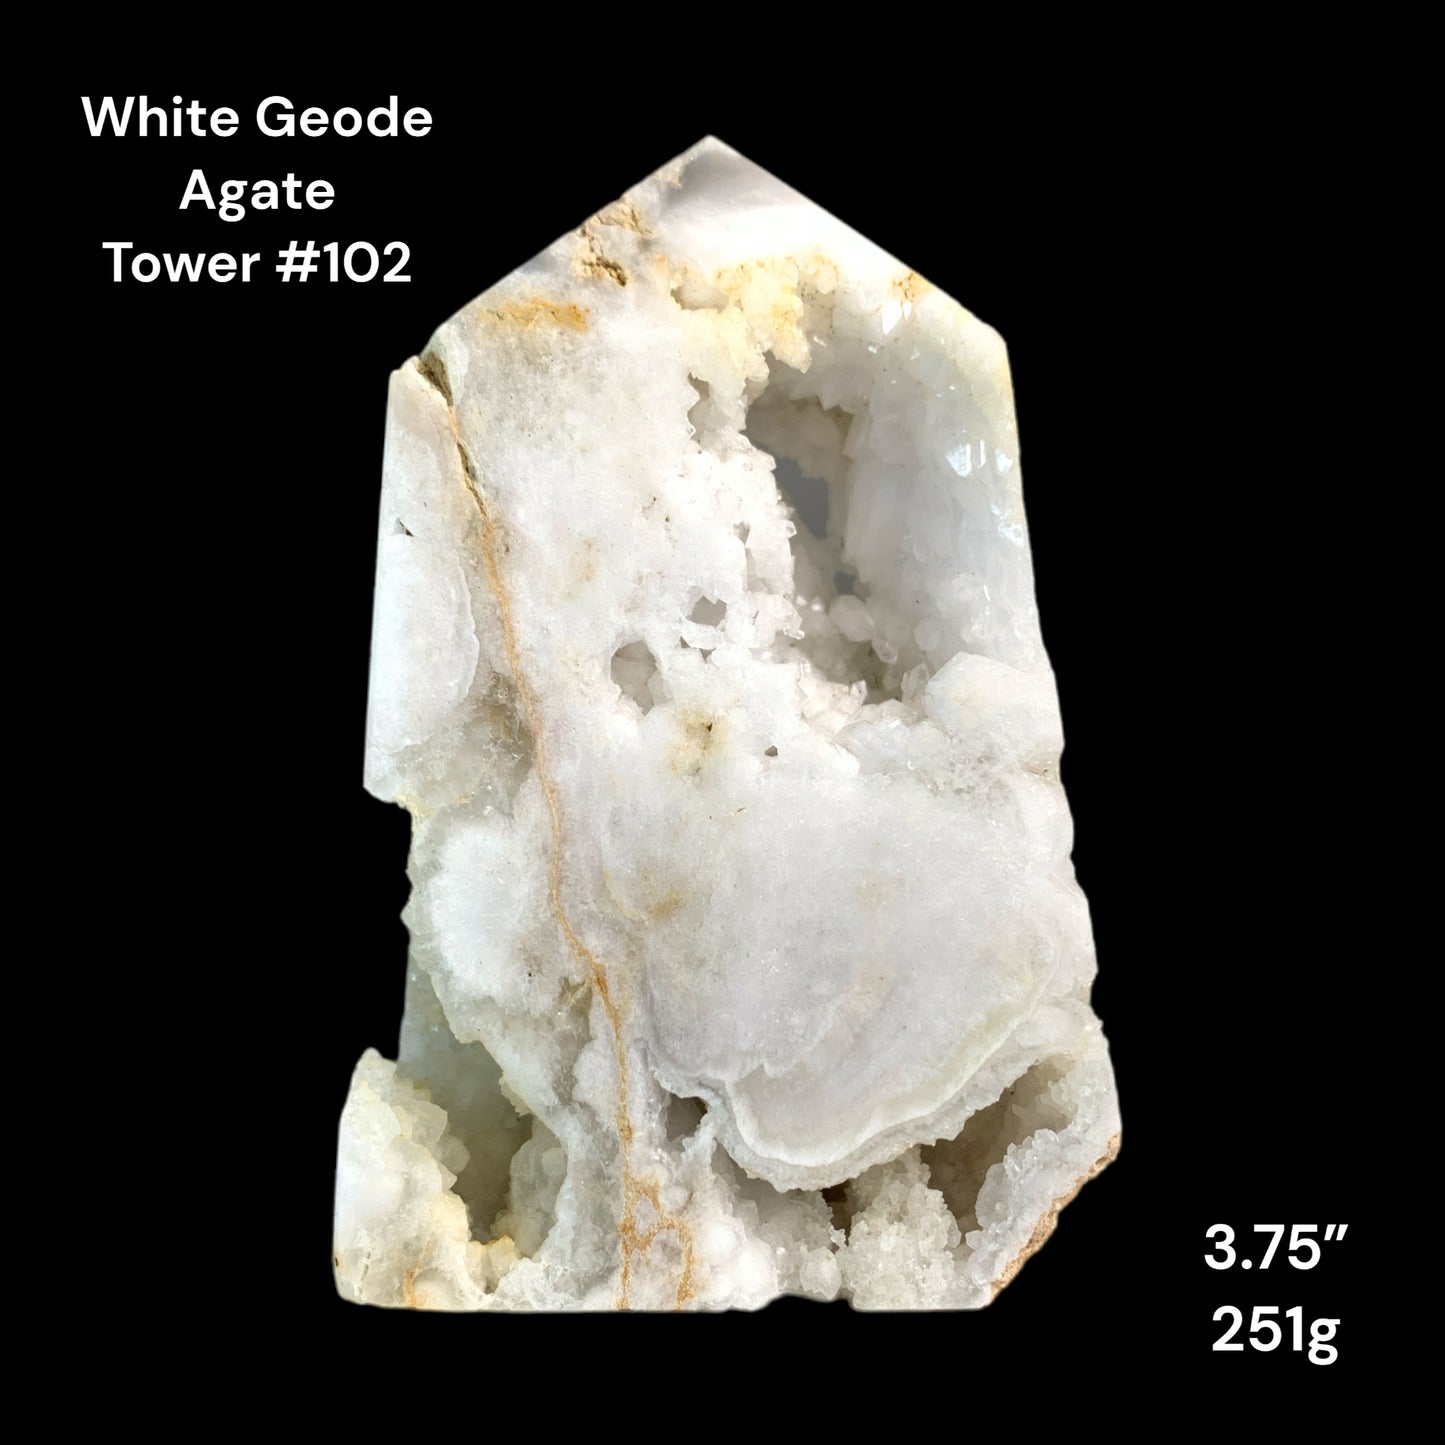 White Geode Agate - 3.75 inch -251g - China - NEW822 - Polished Towers Points